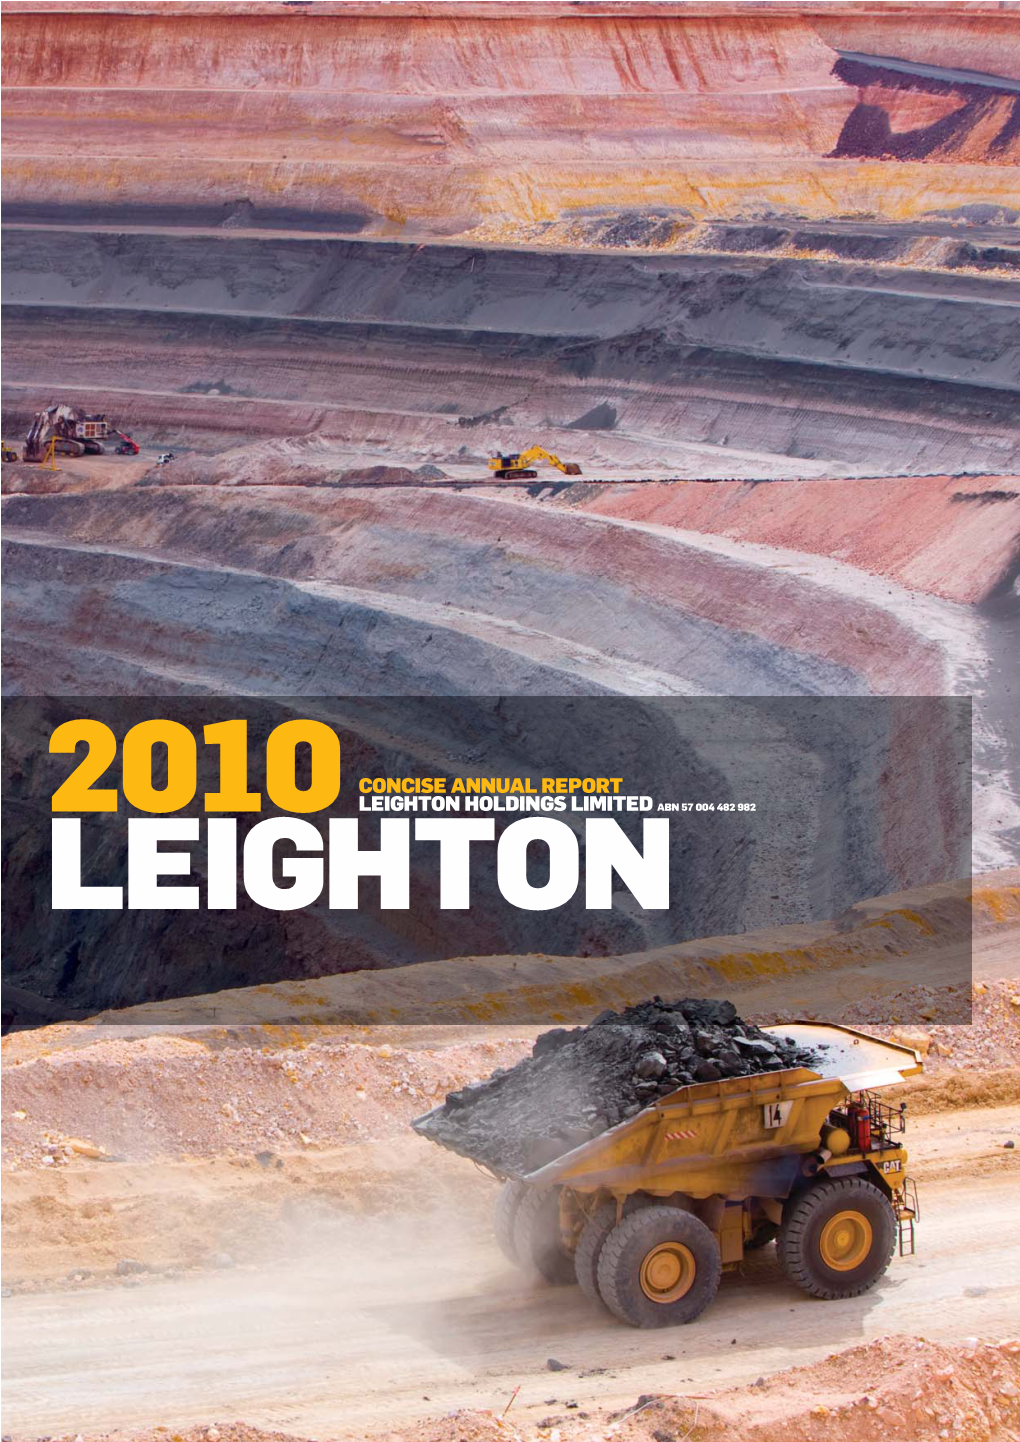 CONCISE ANNUAL REPORT LEIGHTON HOLDINGS LIMITED ABN 57 004 482 982 LEIGHTON » Concise Annual Report 2010 CONTENTS